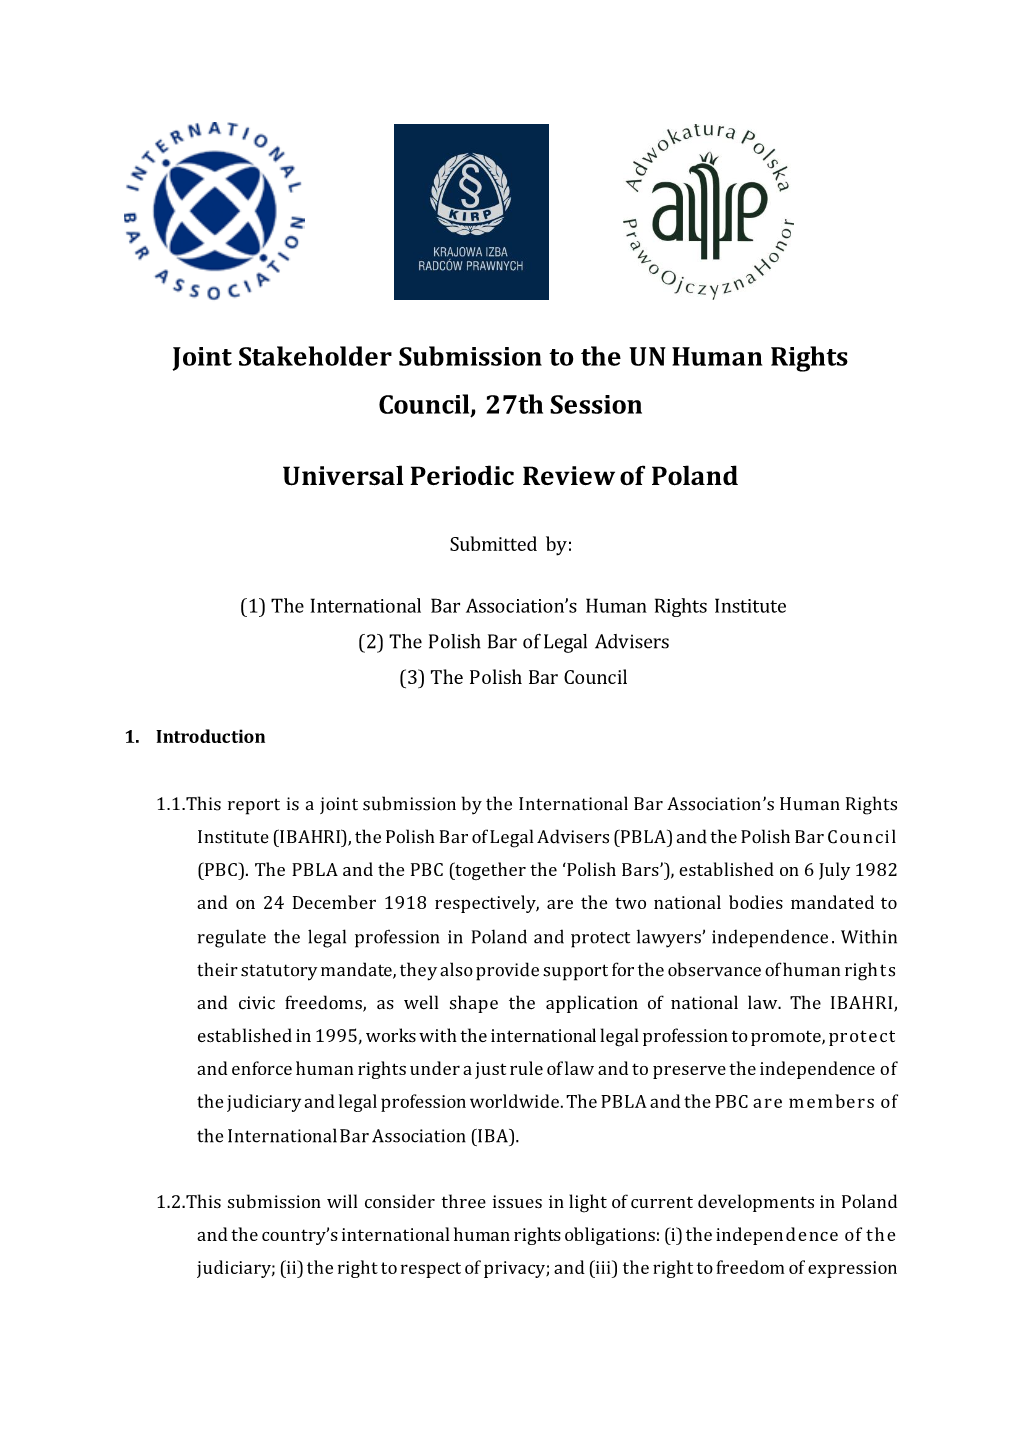 Joint Stakeholder Submission to the UN Human Rights Council, 27Th Session